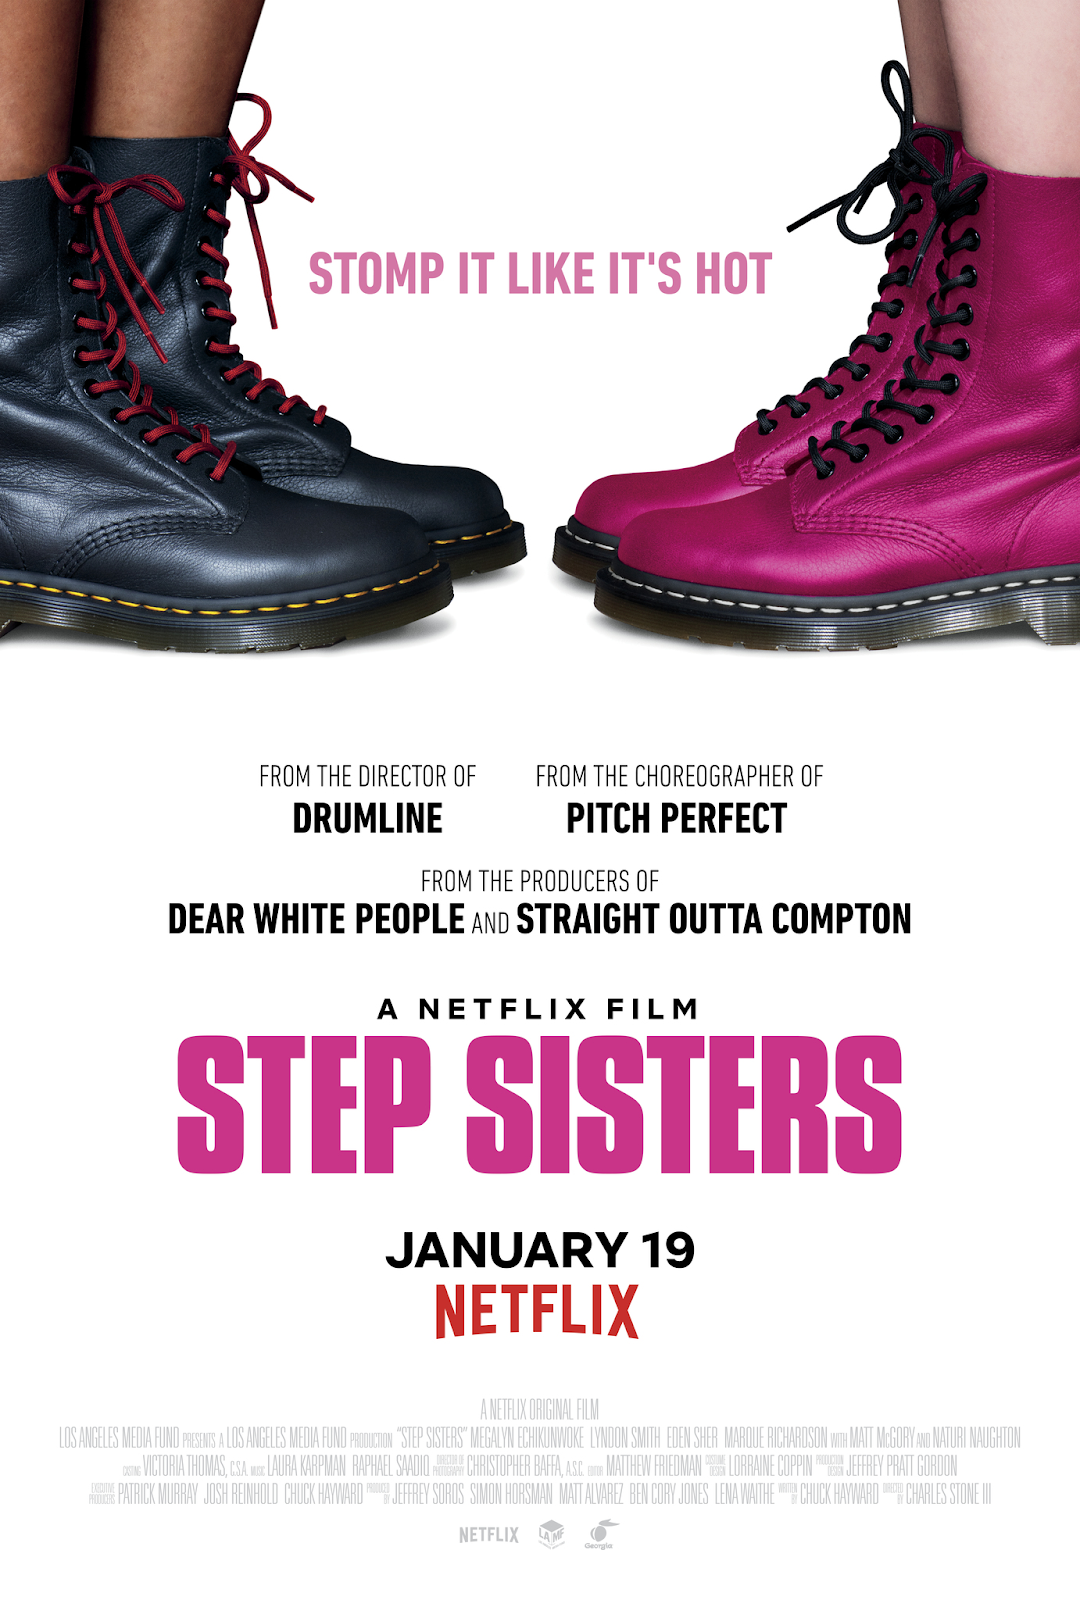 The Step Sisters movie poster of black boots with red laces on the left pointing towards pink boots with black laces on the right.